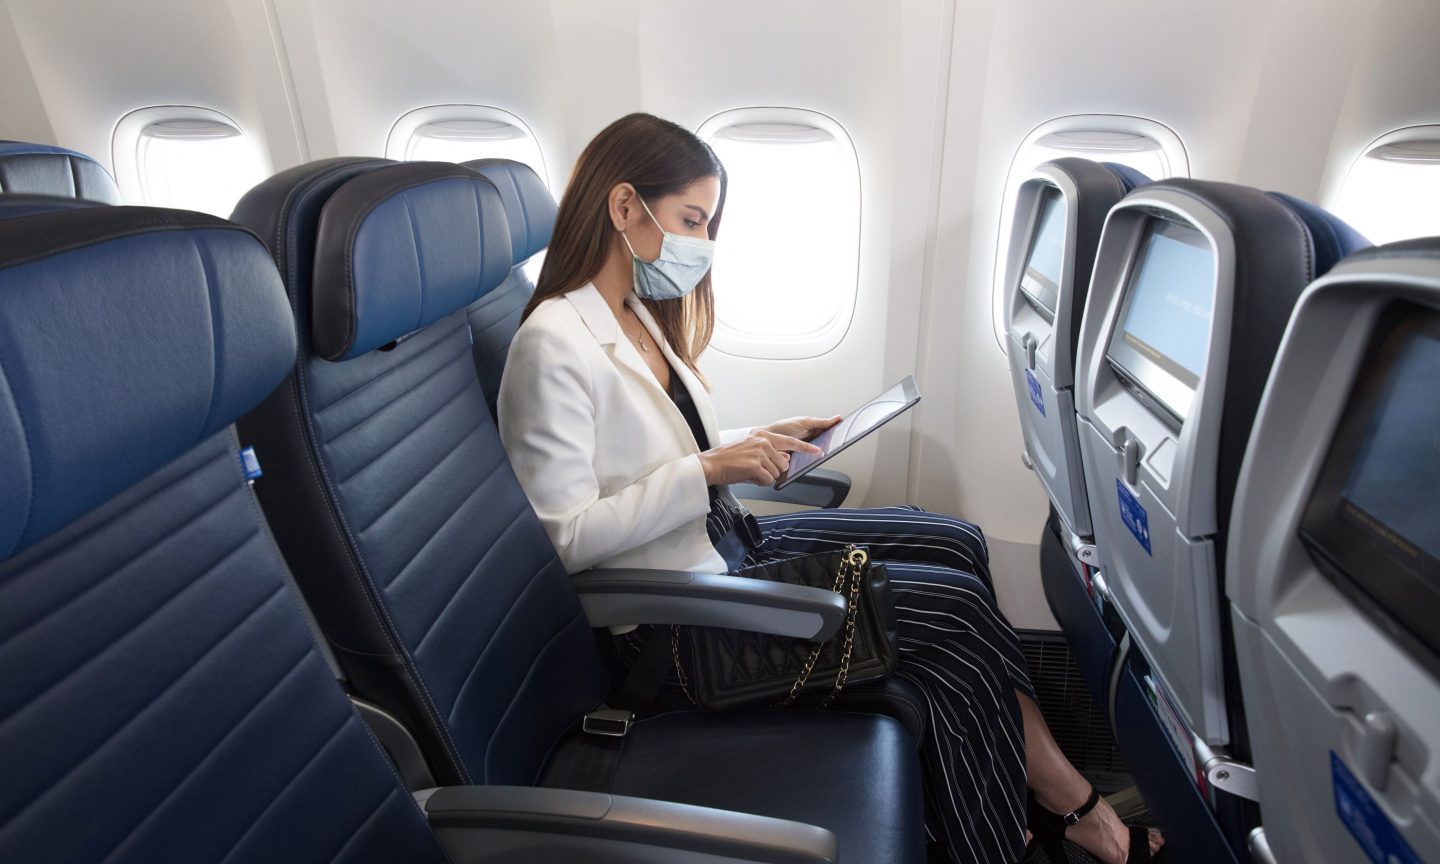 Learn how to Discover Low cost United Flights and Save – NerdWallet